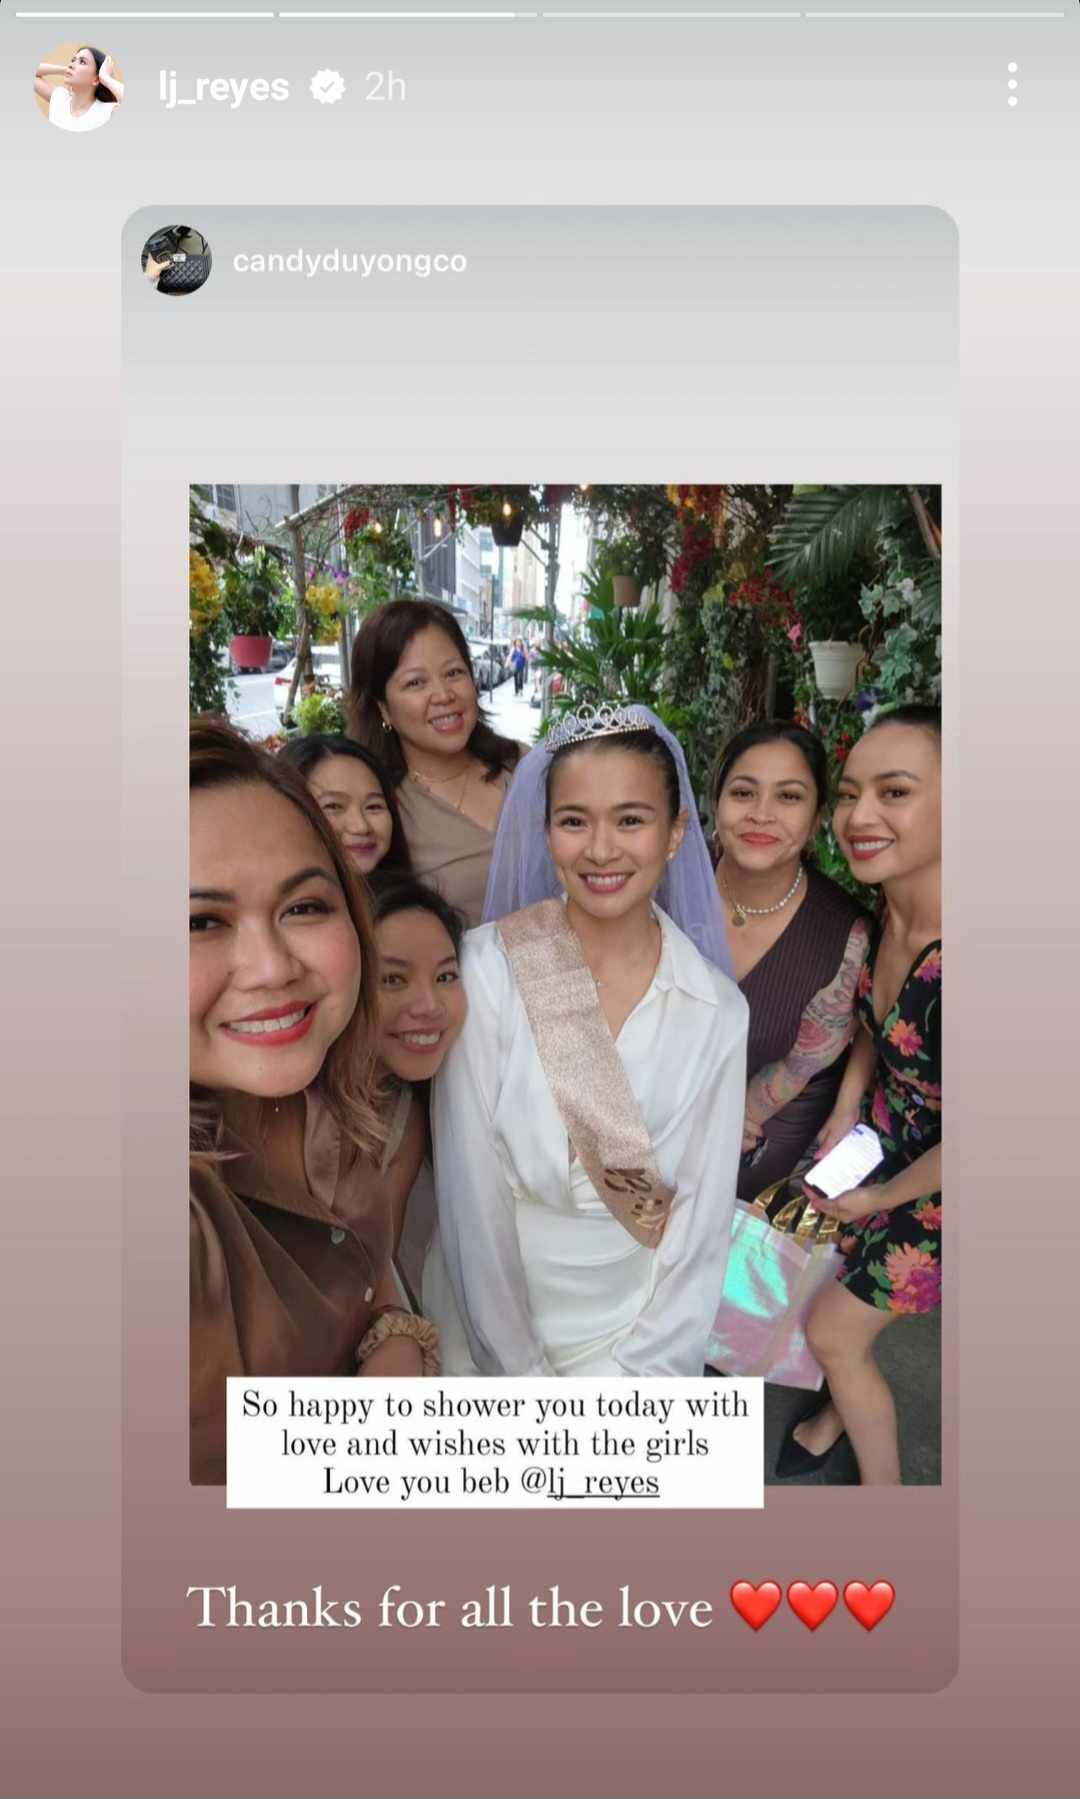 Friends throw a bridal shower for LJ Reyes in New York City